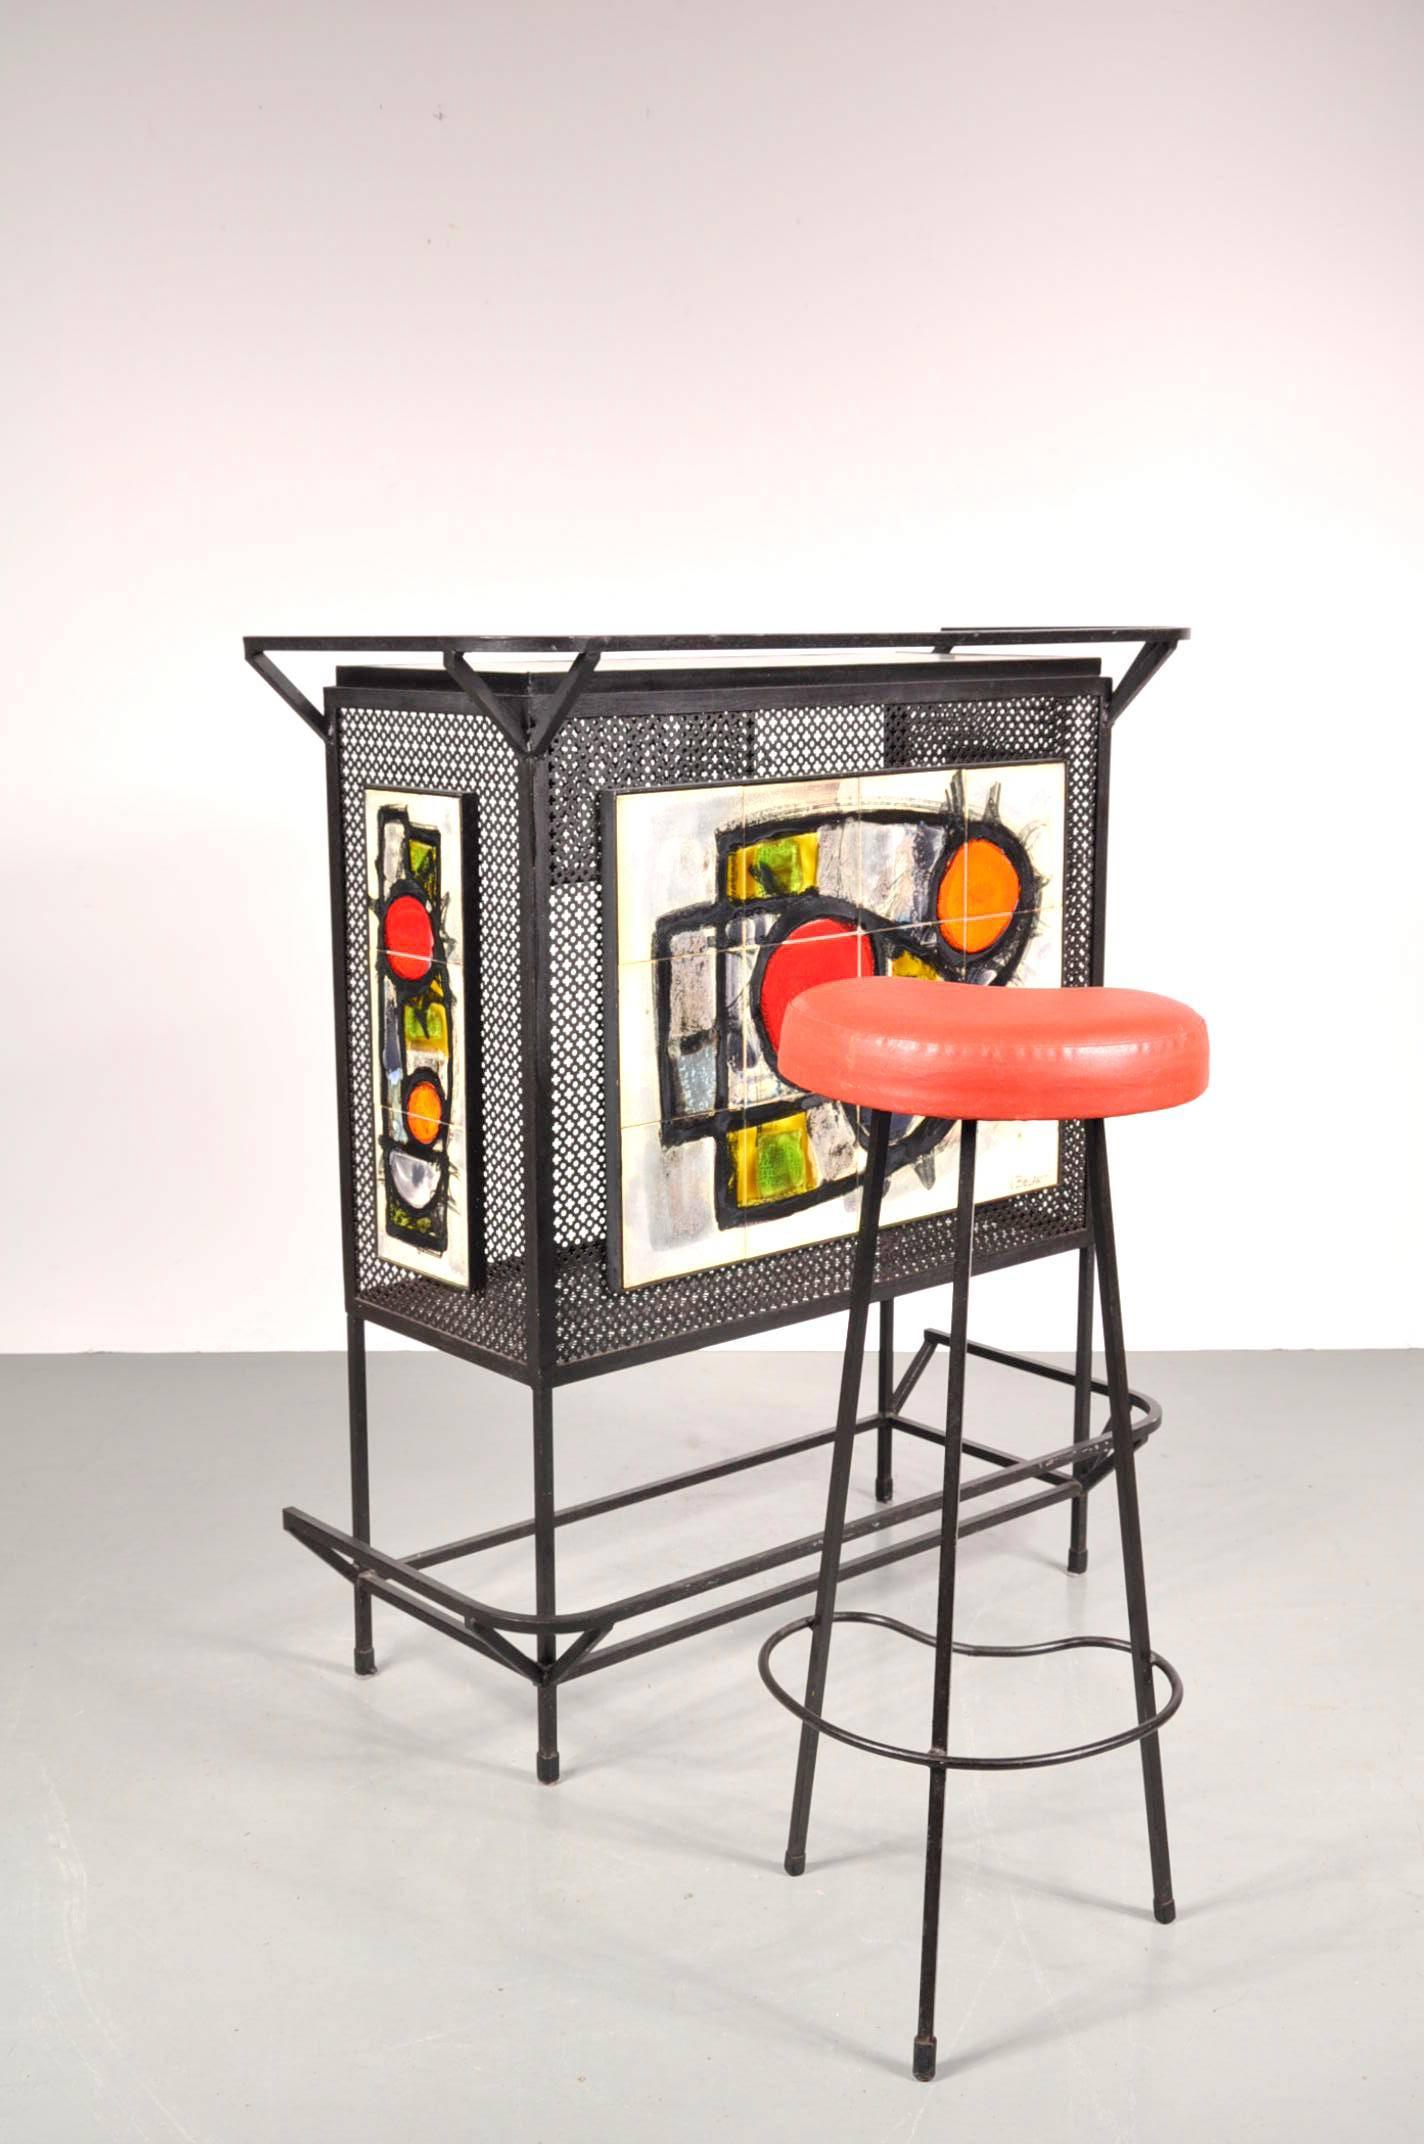 Stunning little bar with stool, designed and signed by J. Belarti in Belgium, circa 1950.

The bar and stool are made of black lacquered metal. The sides of the bar made of beautifuly perforated metal and the front has ceramics painted with